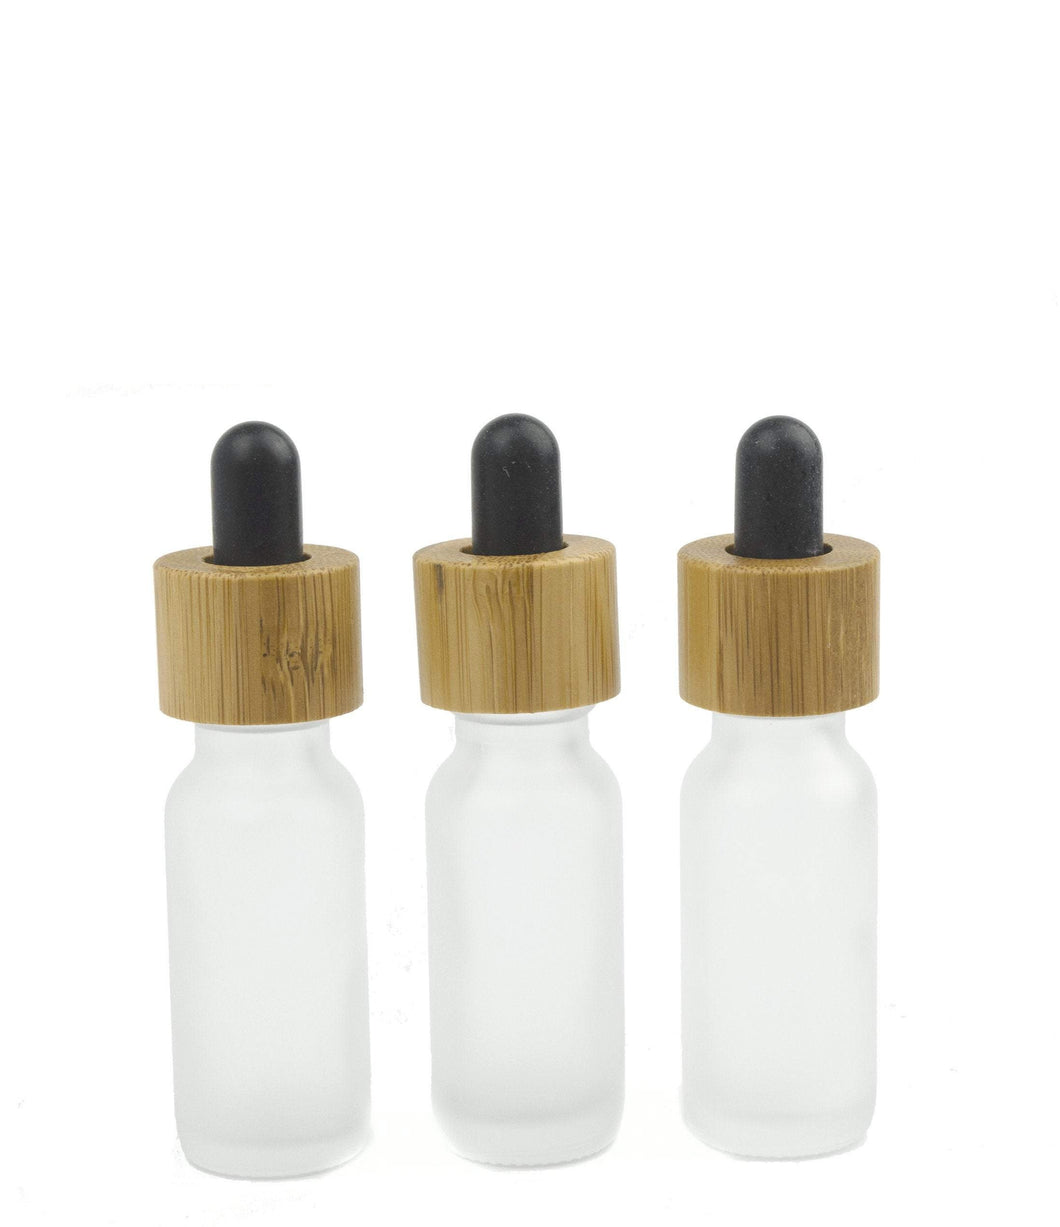 3 NATURAL BAMBOO Dropper Bottles, 15ml Clear FROSTED, Green Packaging, DIY Essential Oil Storage Private Label Packaging Spa Store Luxury